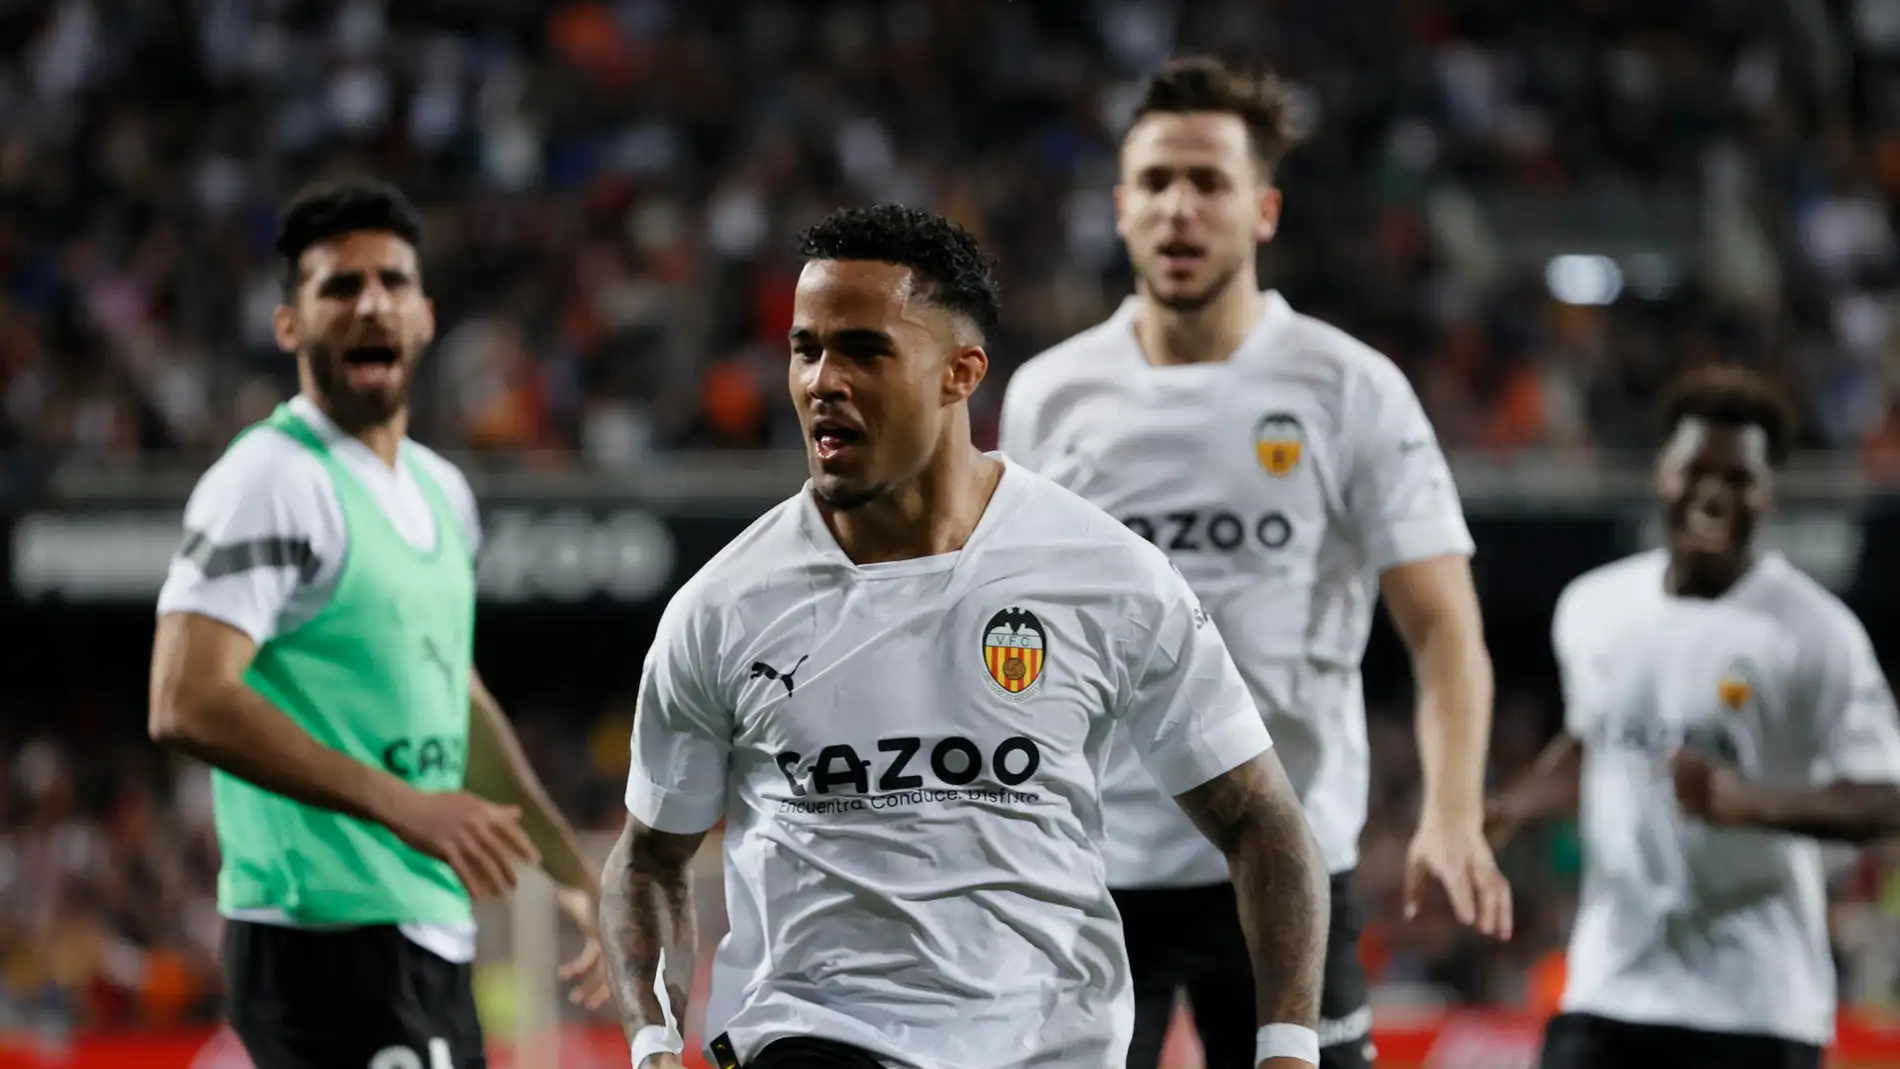 Justin Kluivert will experience his last matches in the Valencia CF shirt